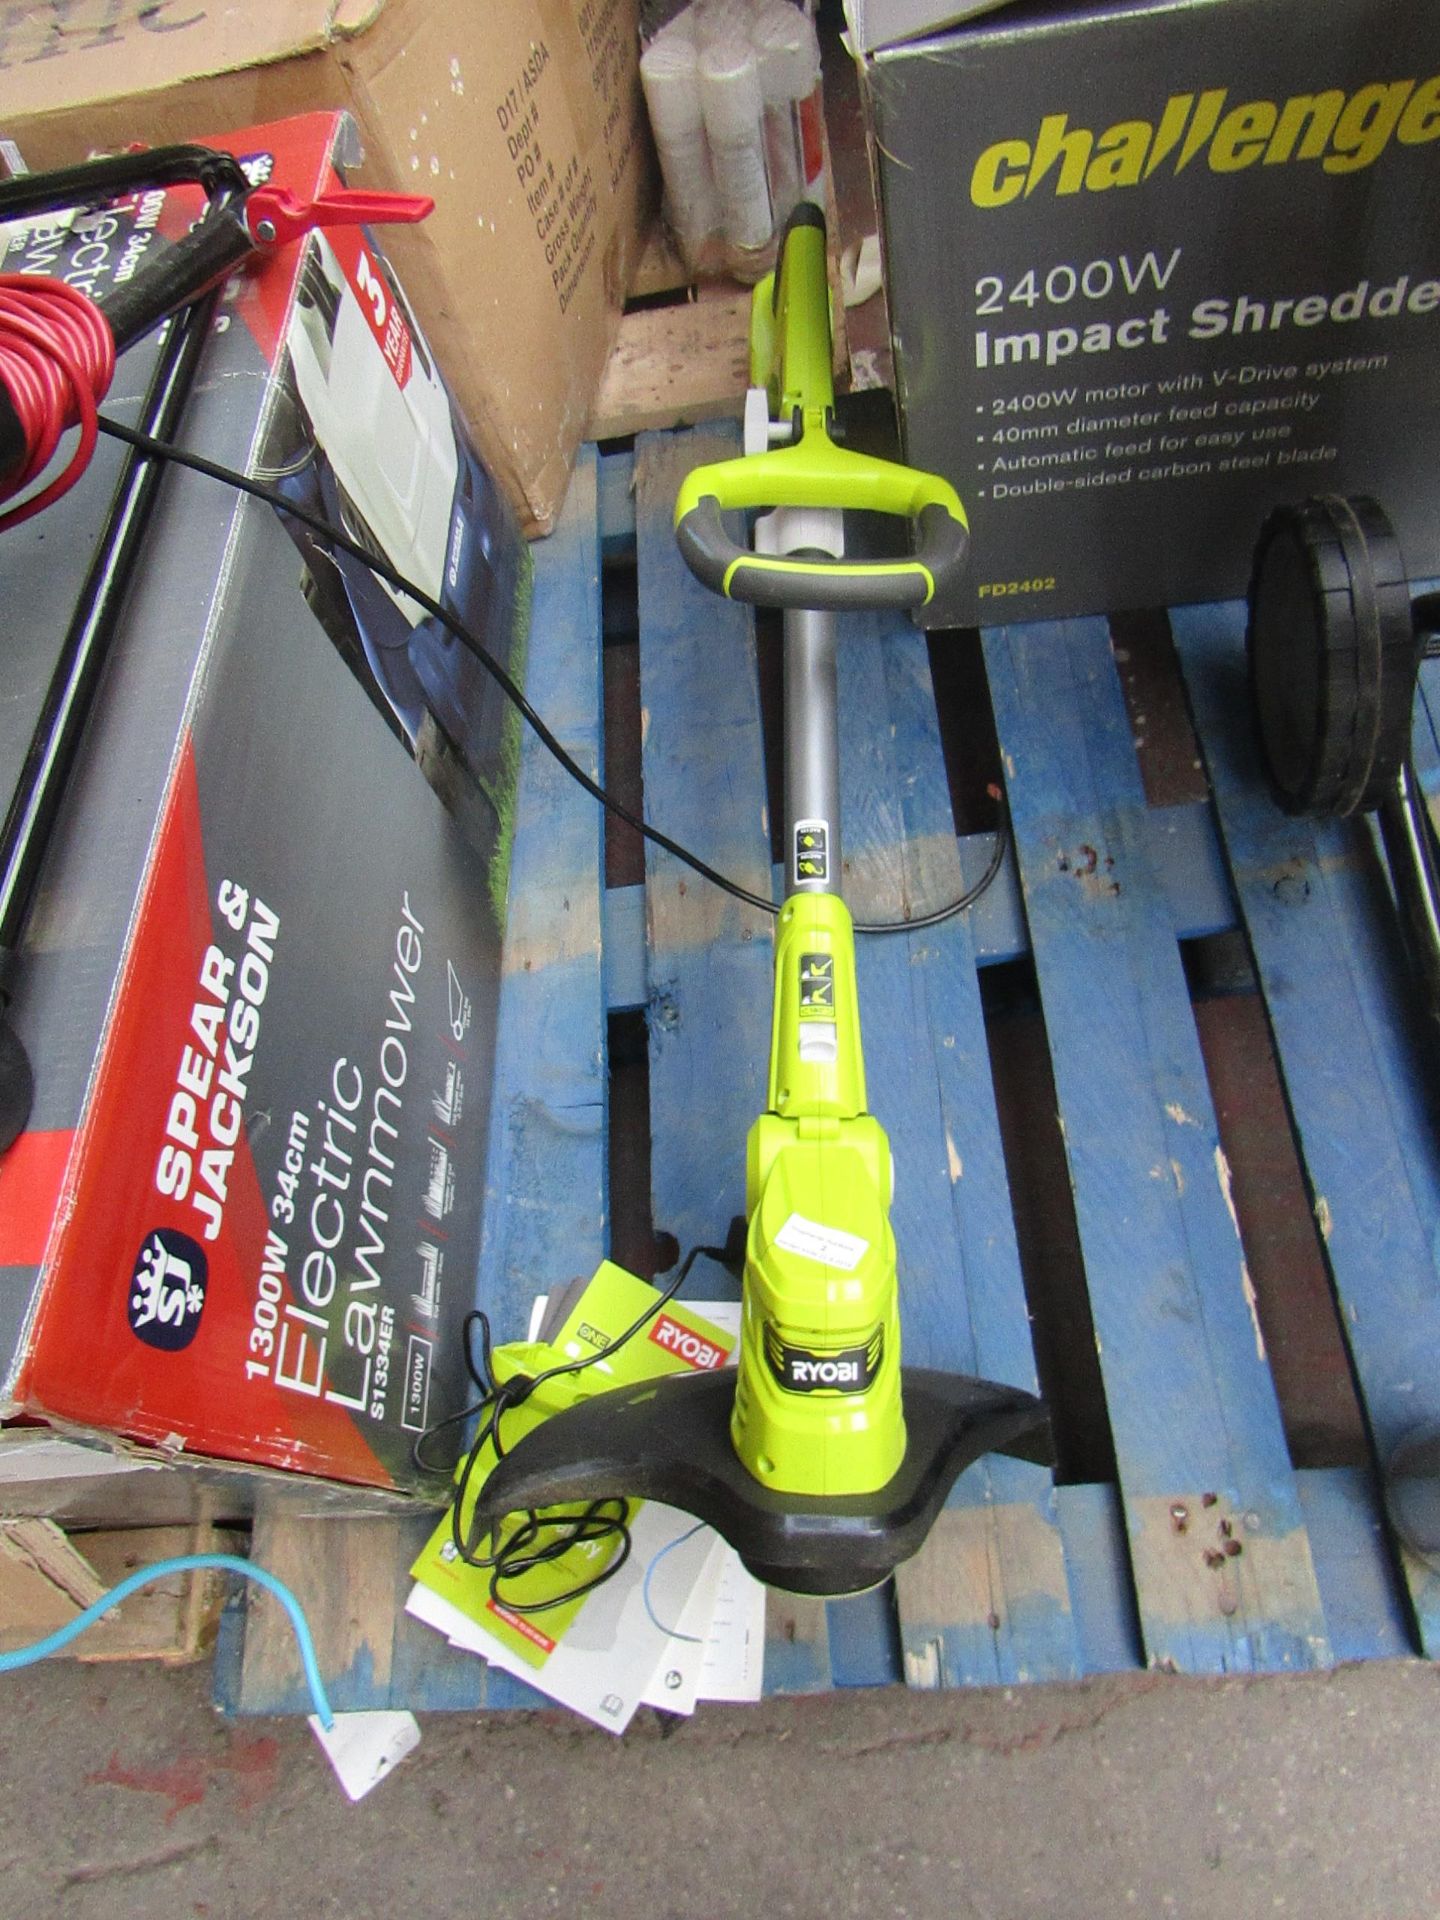 Ryobi one+ cordless grass trimmer, unable to check as no battery but does come with charger and